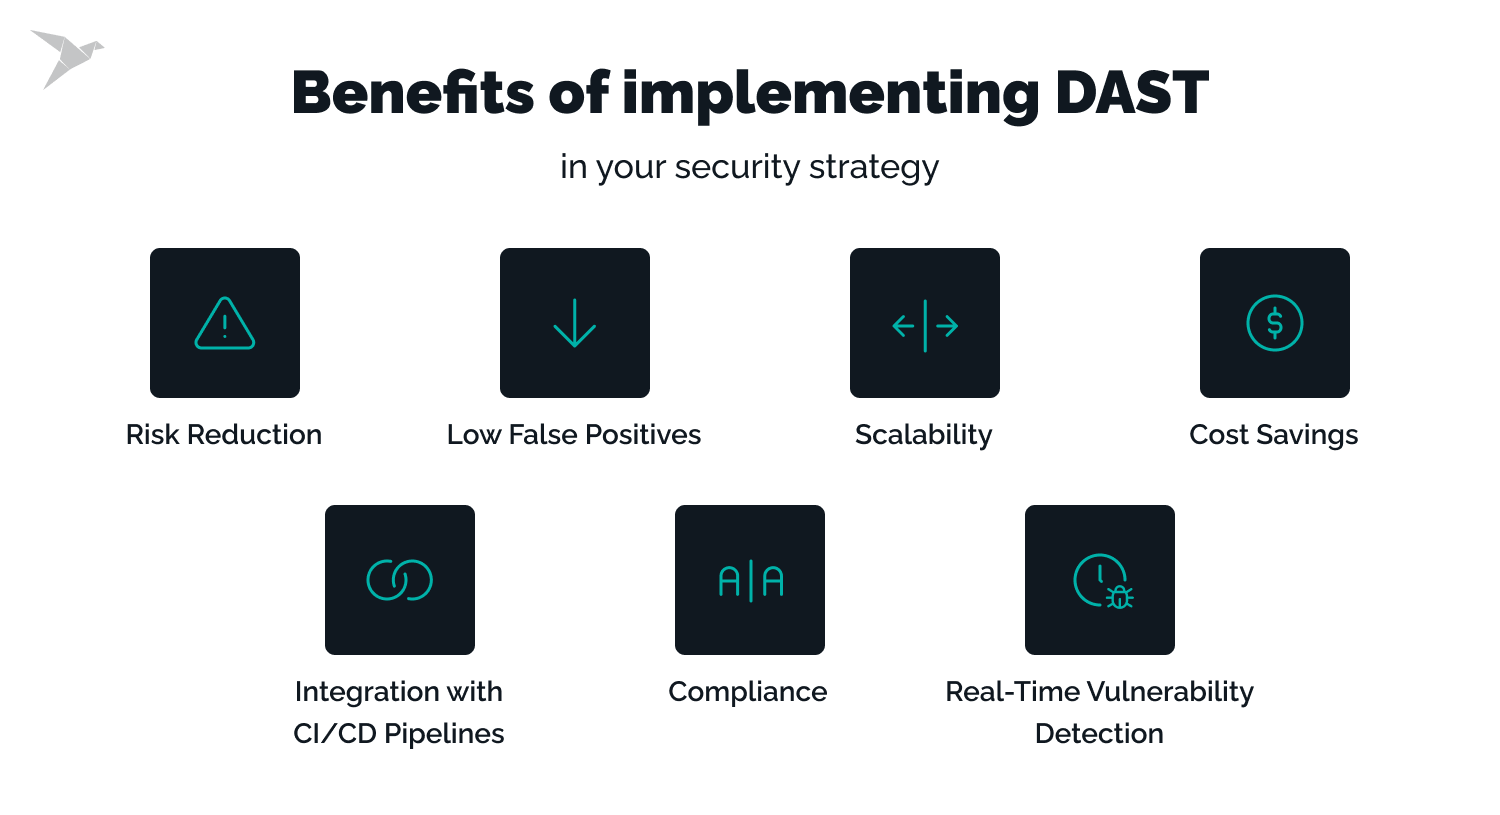 Benefits of Implementing DAST